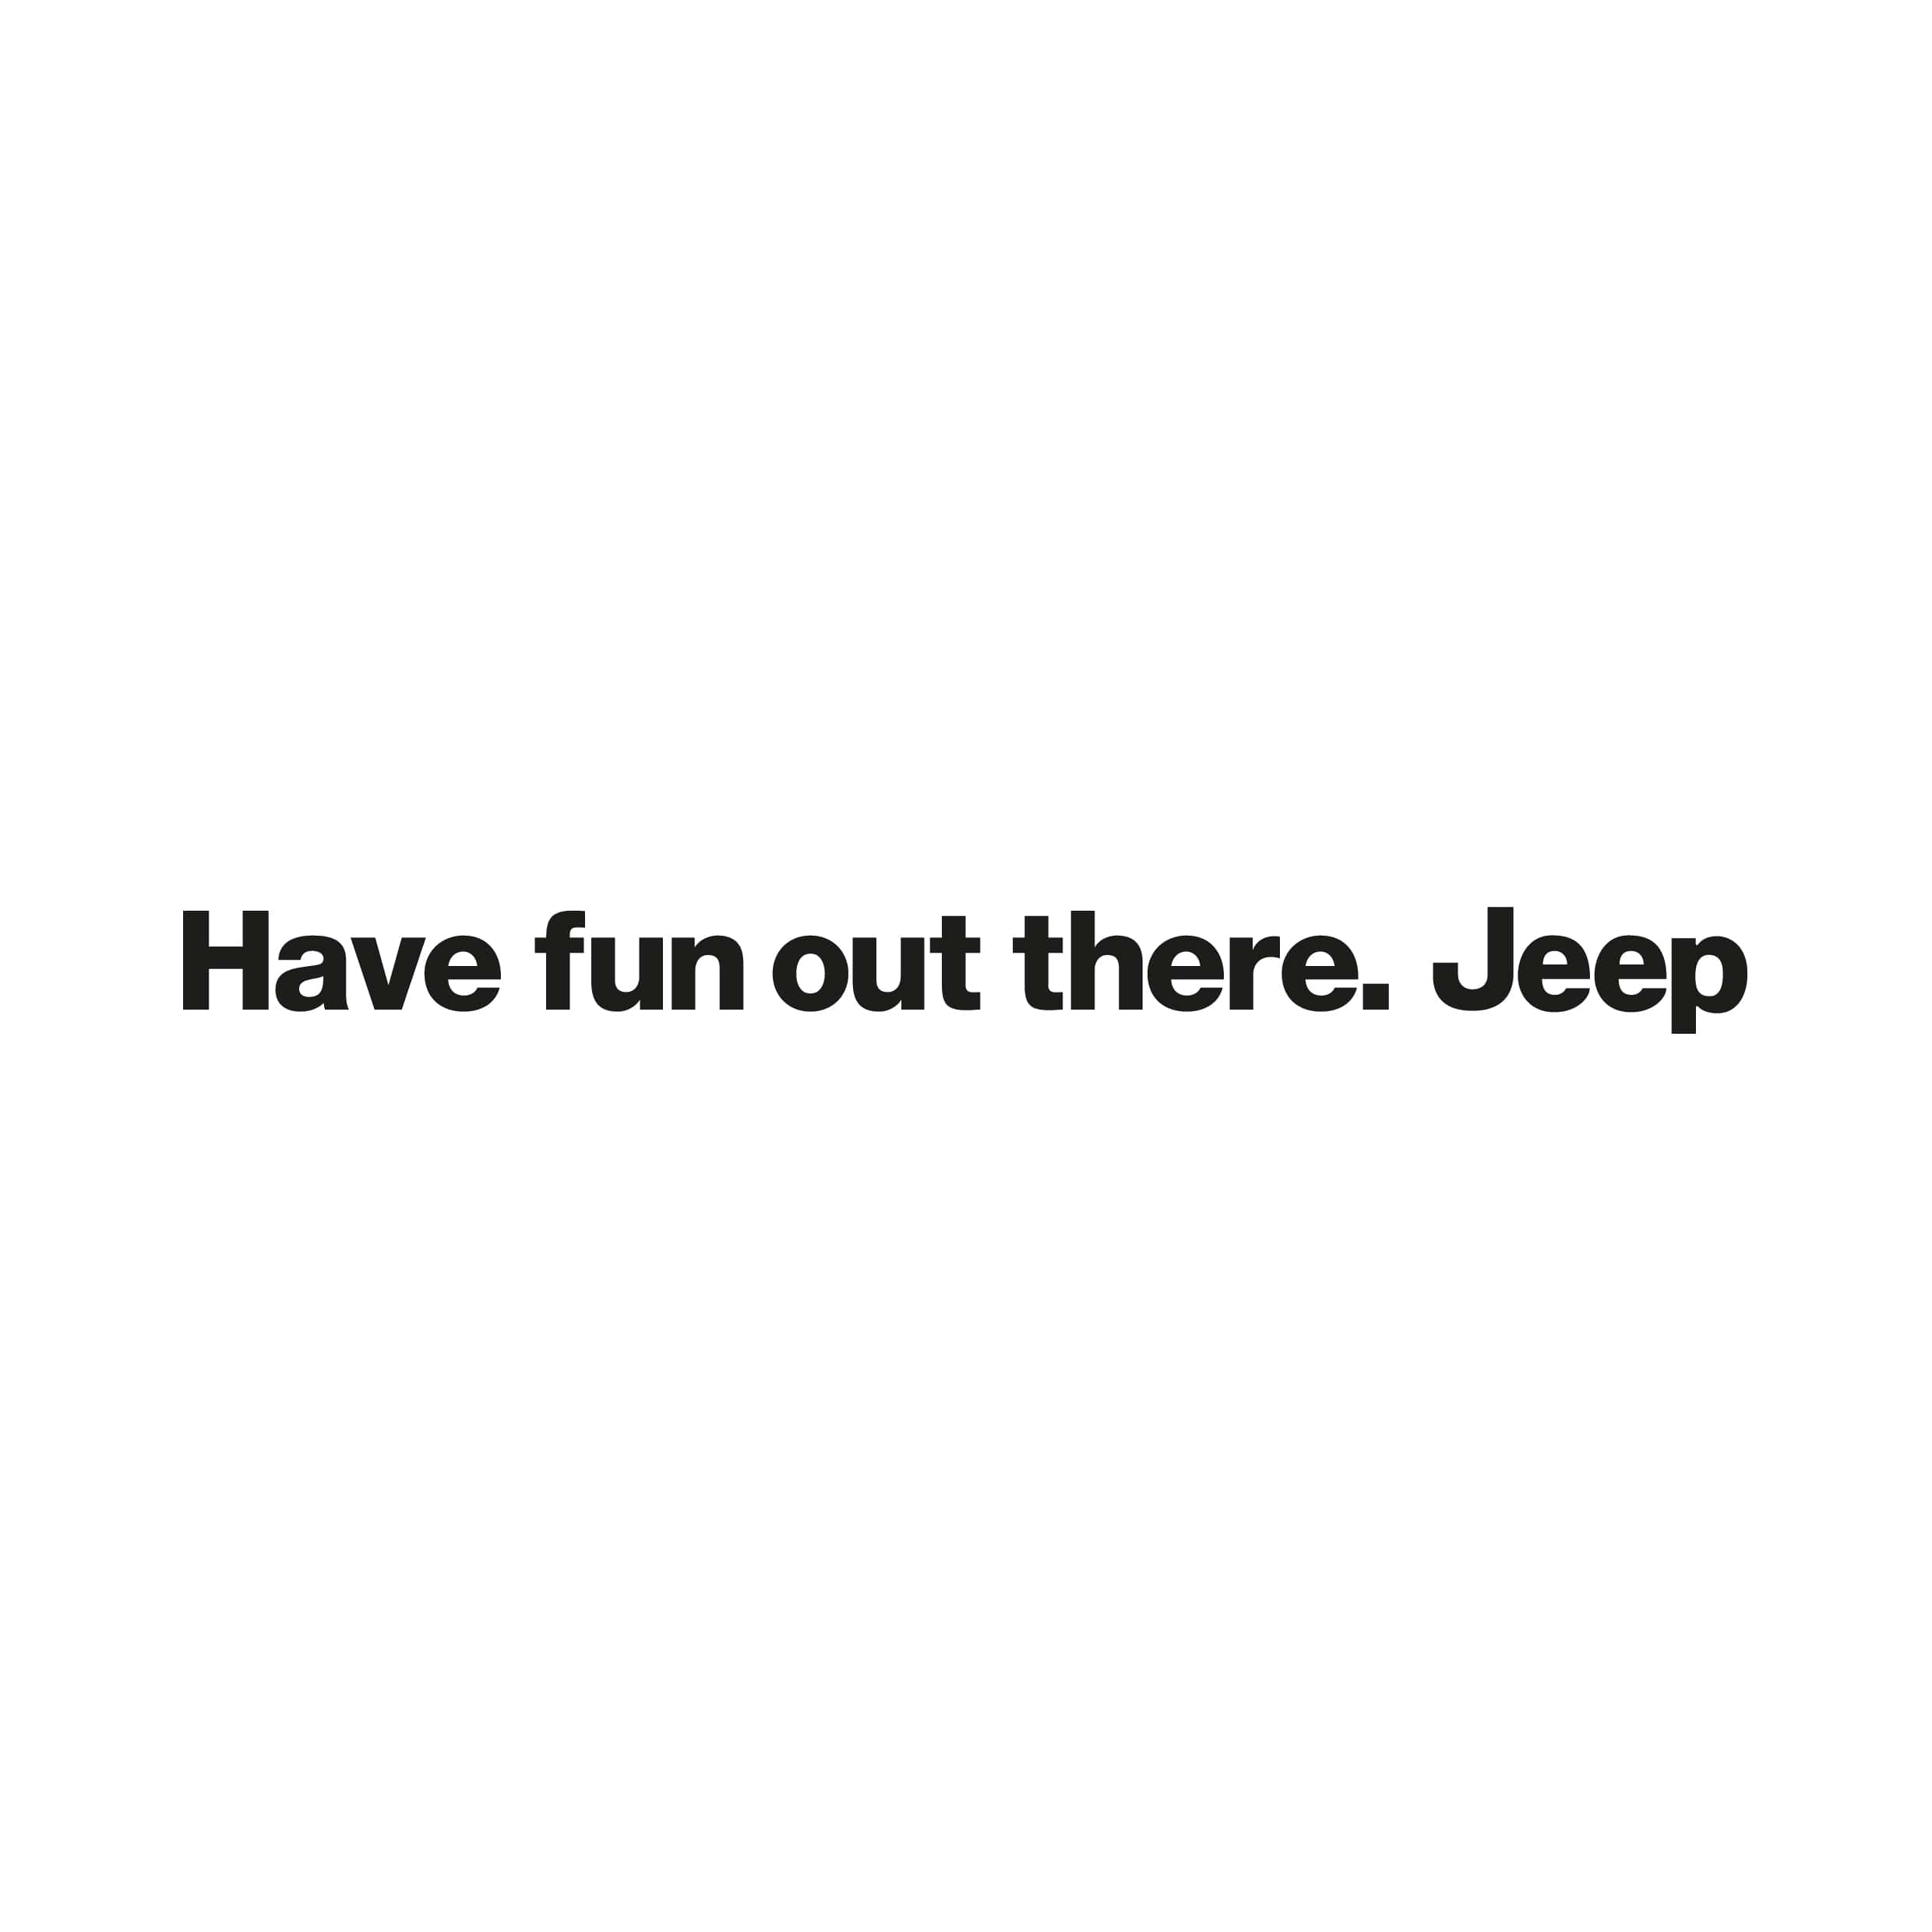 stickers-have-fun-out-there-jeep-ref27-autocollant-4x4-sticker-suv-off-road-autocollants-decals-sponsors-tuning-rallye-voiture-logo-min